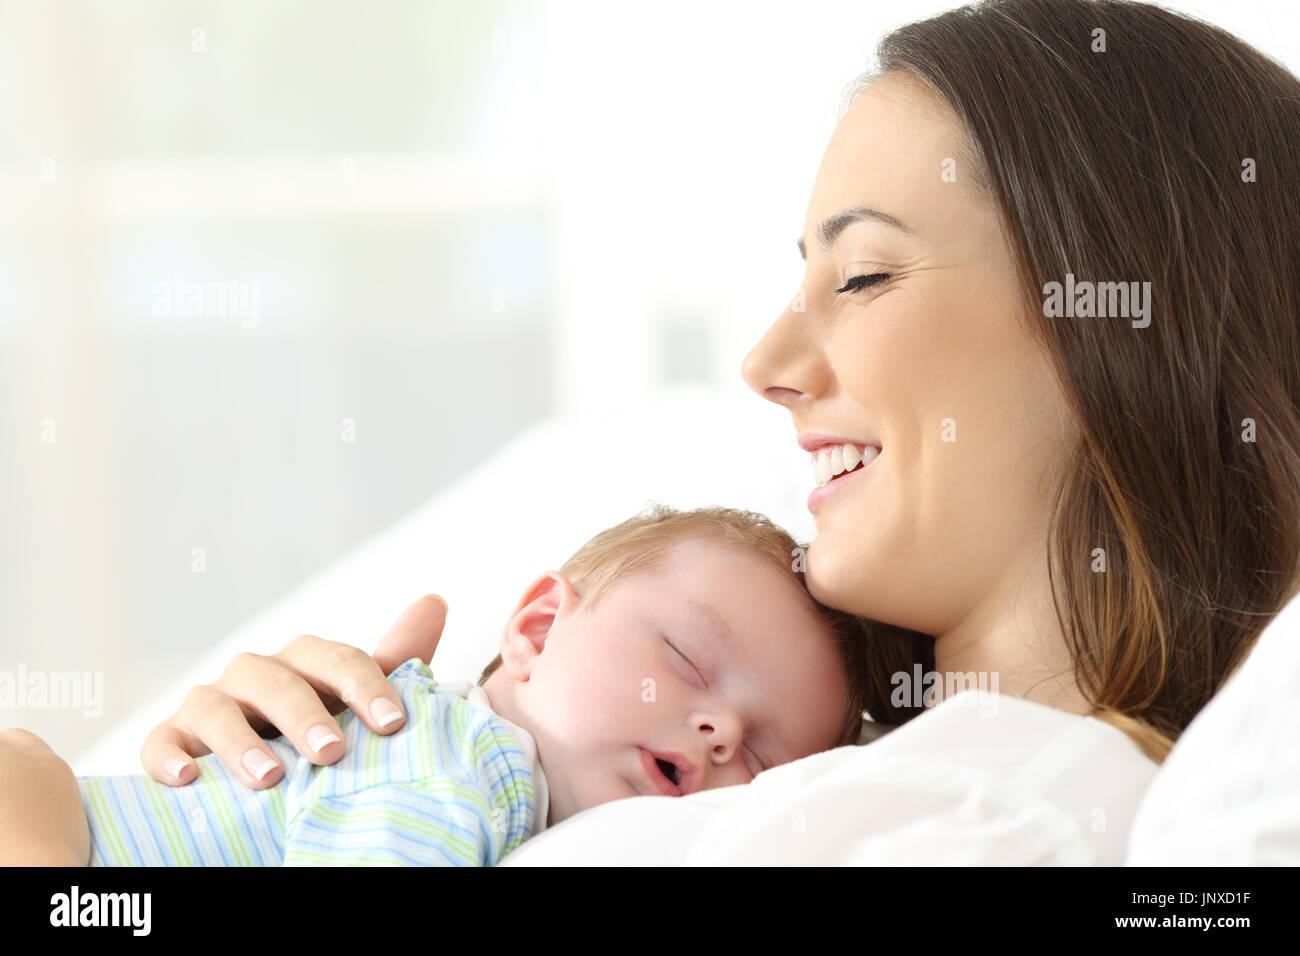 Side view portrait of a happy mother sleeping with her baby on a bed Stock Photo